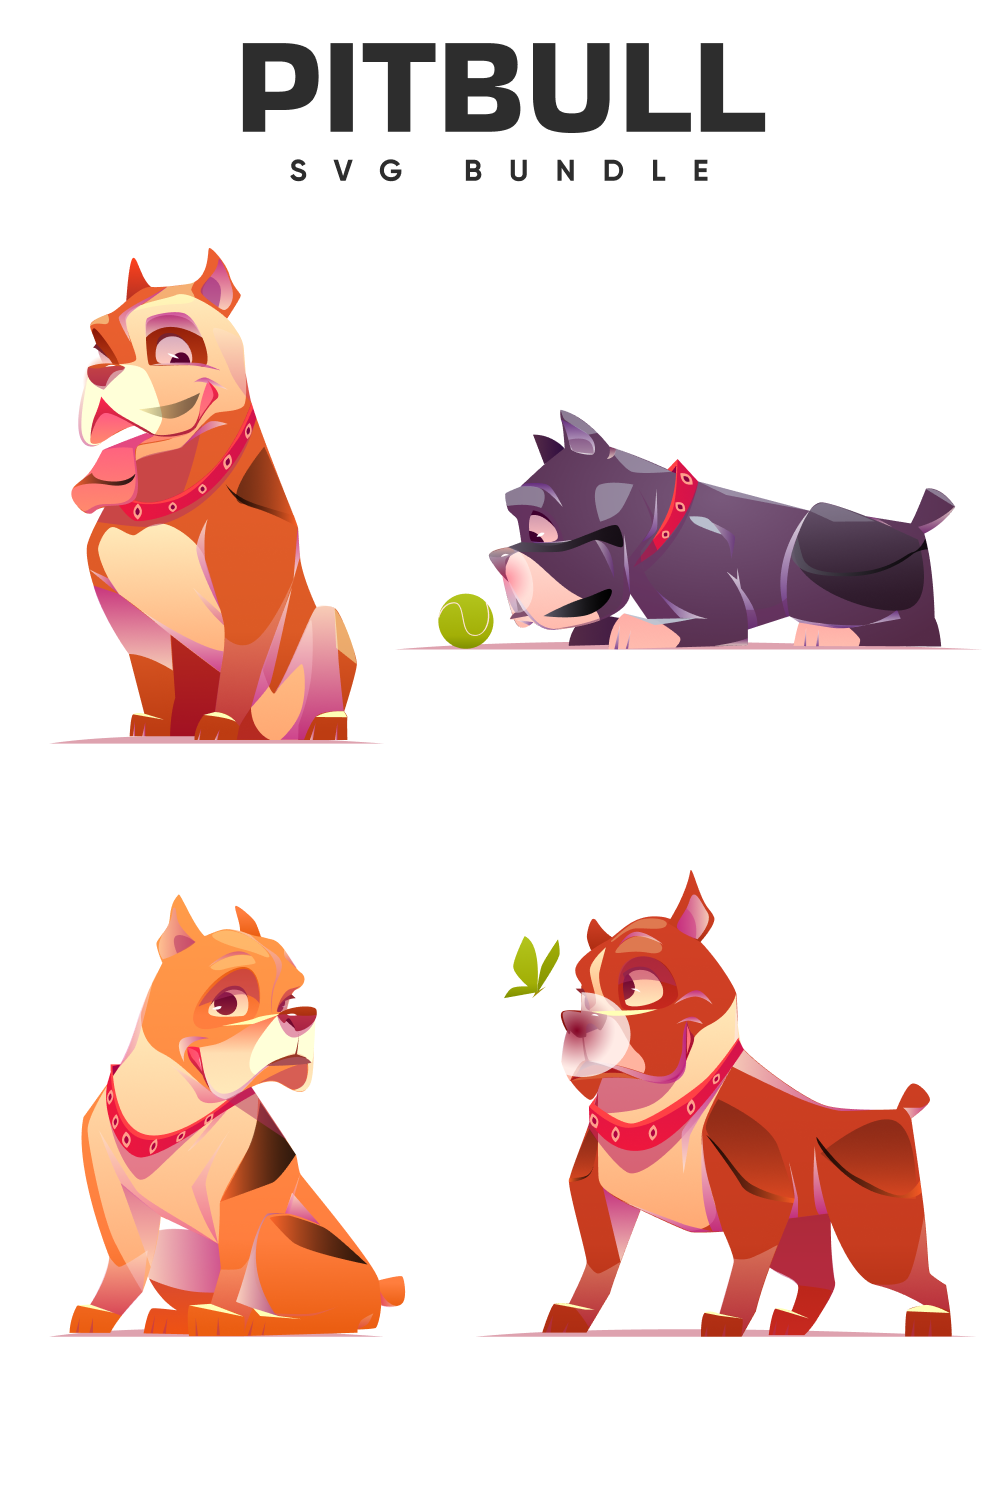 Series of cartoon dogs with different poses.